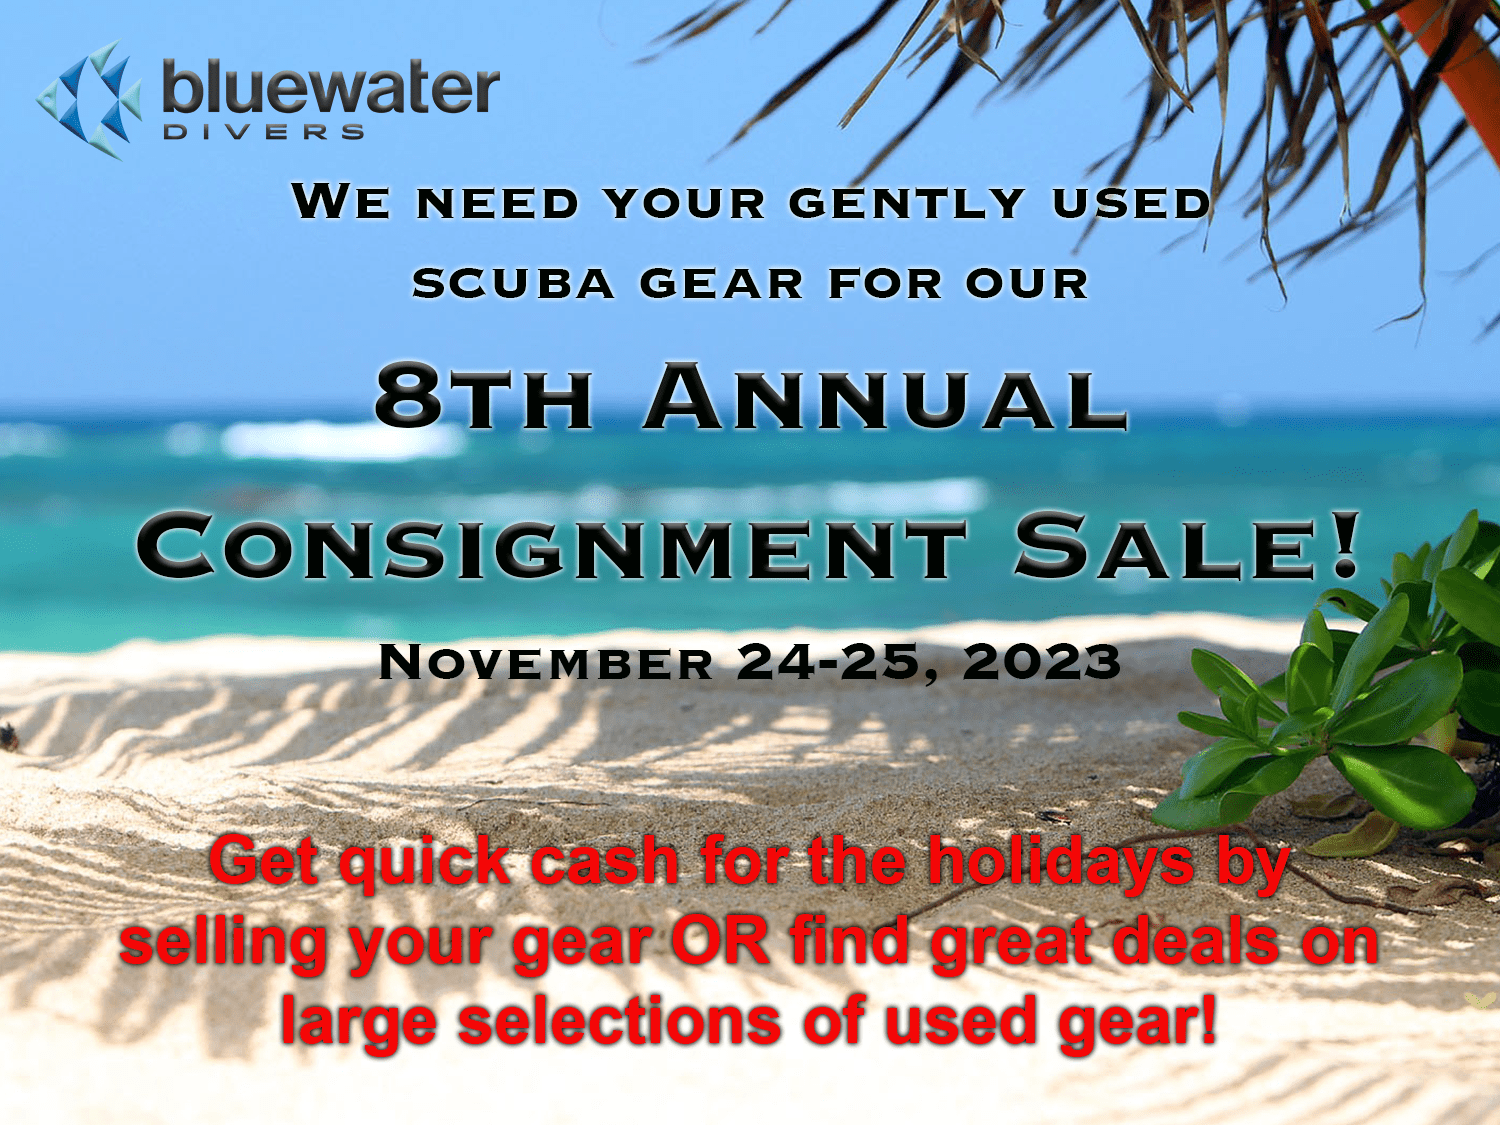 Bluewater Divers Annual Consignment Sale Scuba Gear Equipment